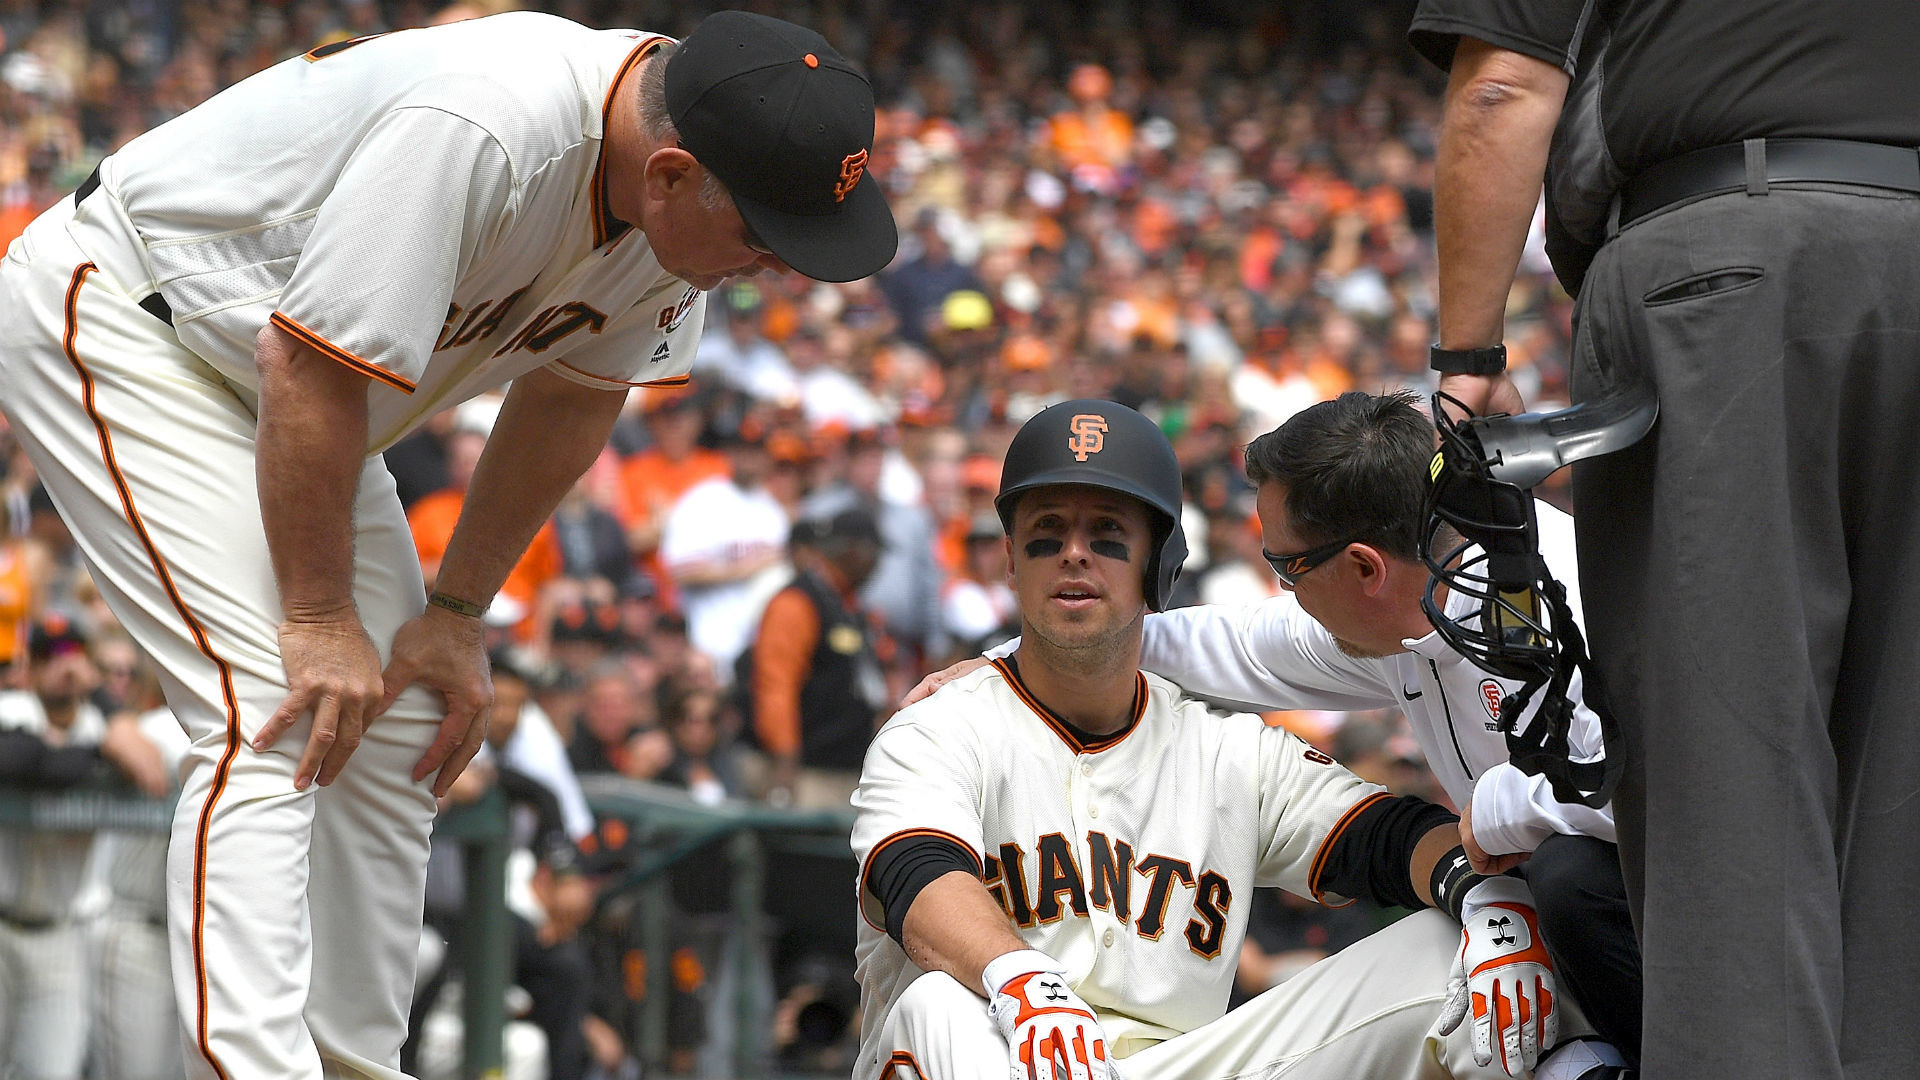 Giants place Buster Posey on DL after fastball to helmet MLB Sporting News